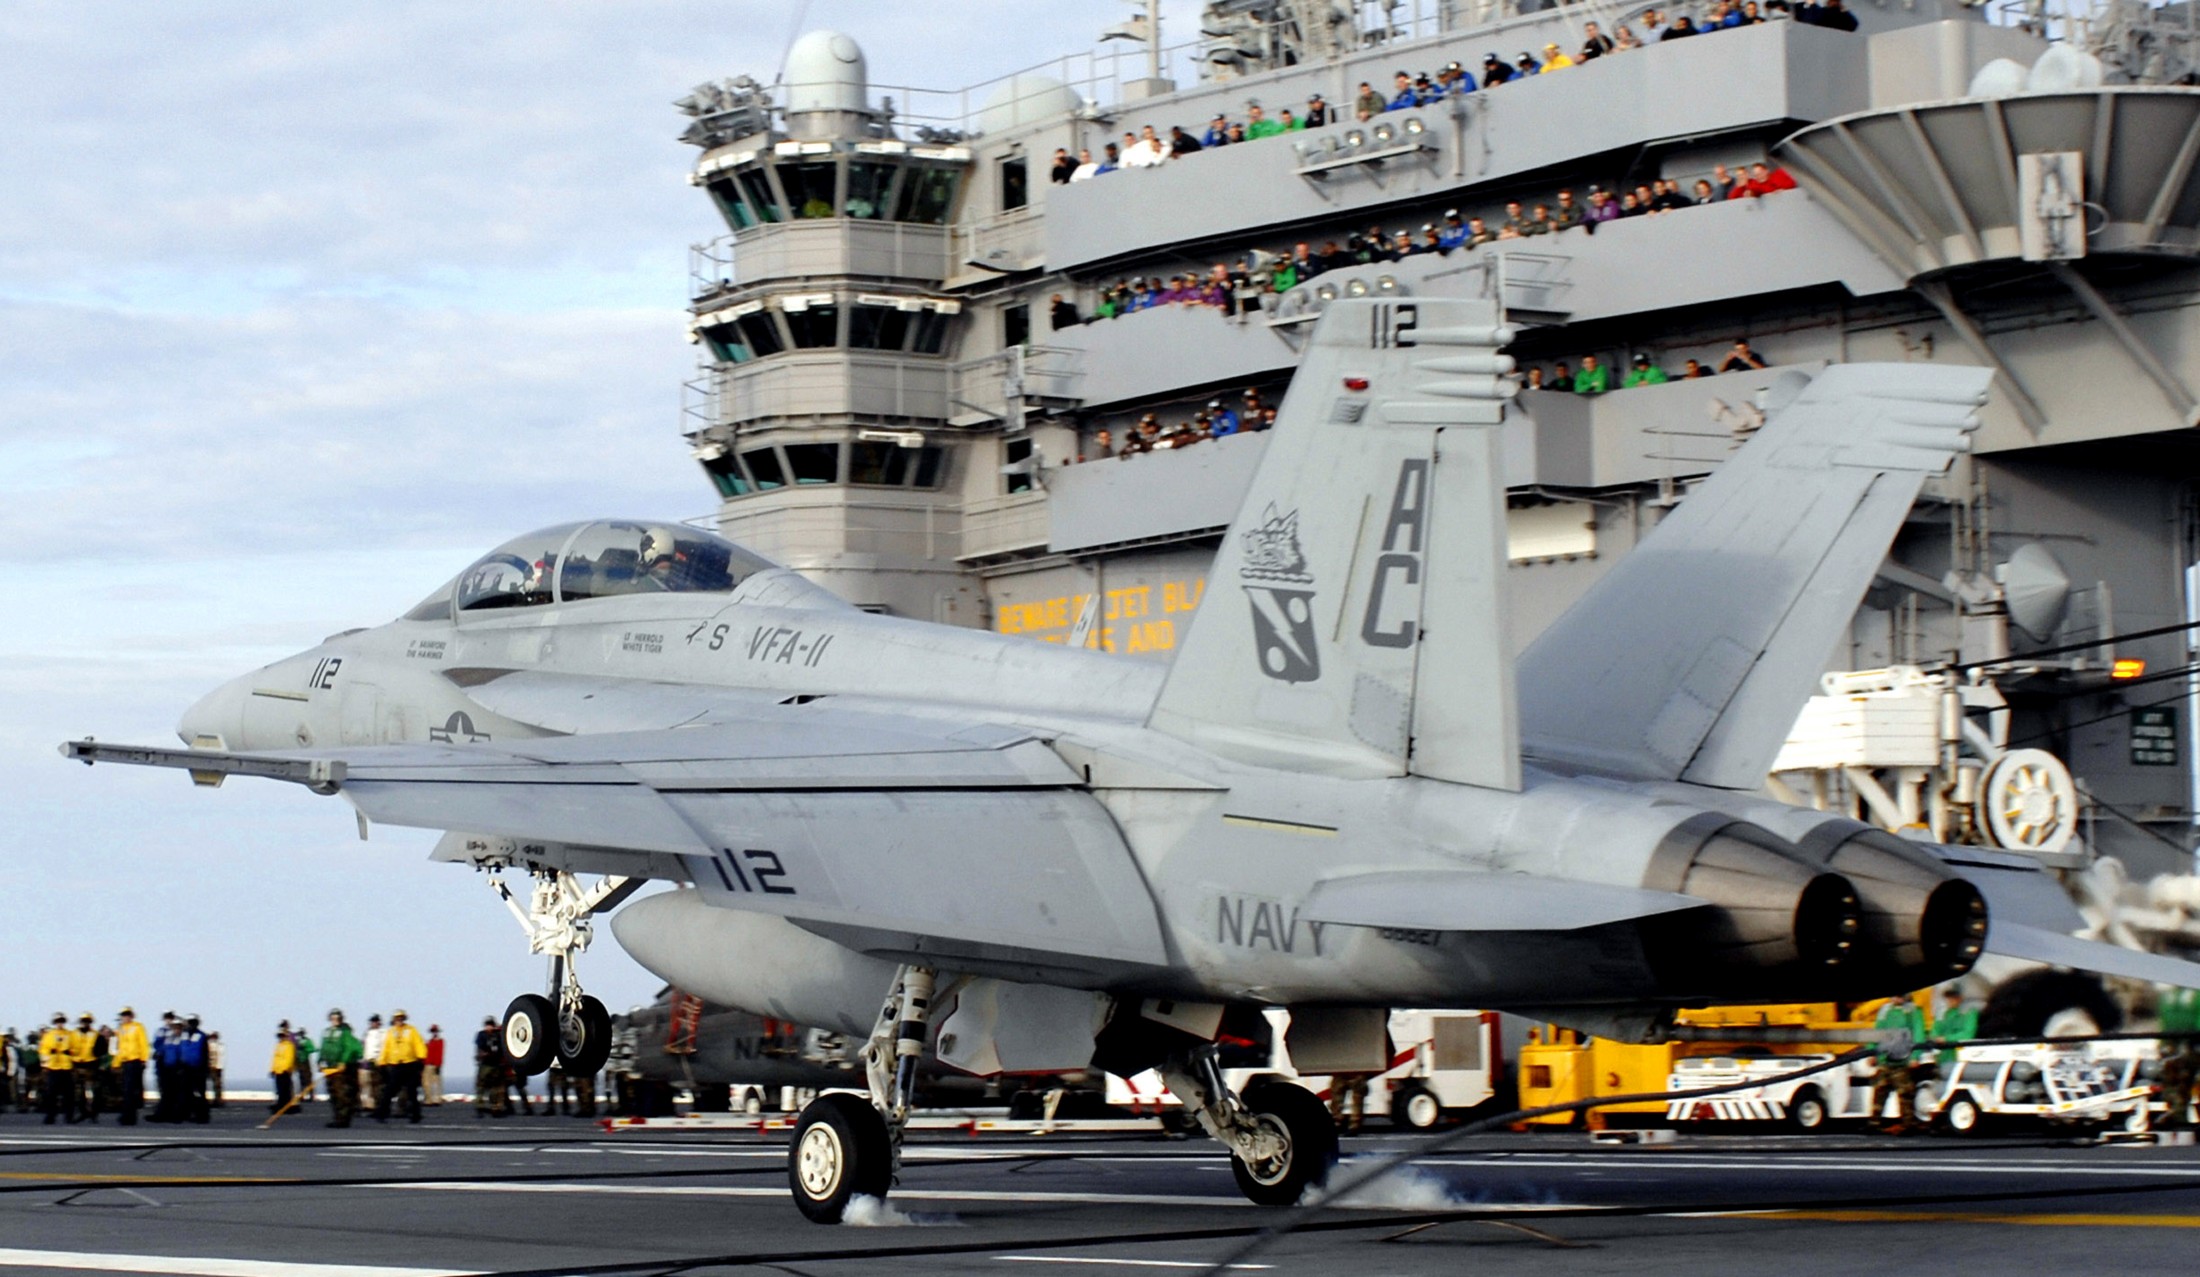 vfa-11 red rippers strike fighter squadron us navy f/a-18f super hornet carrier air wing cvw-3 uss harry s. truman cvn-75 63